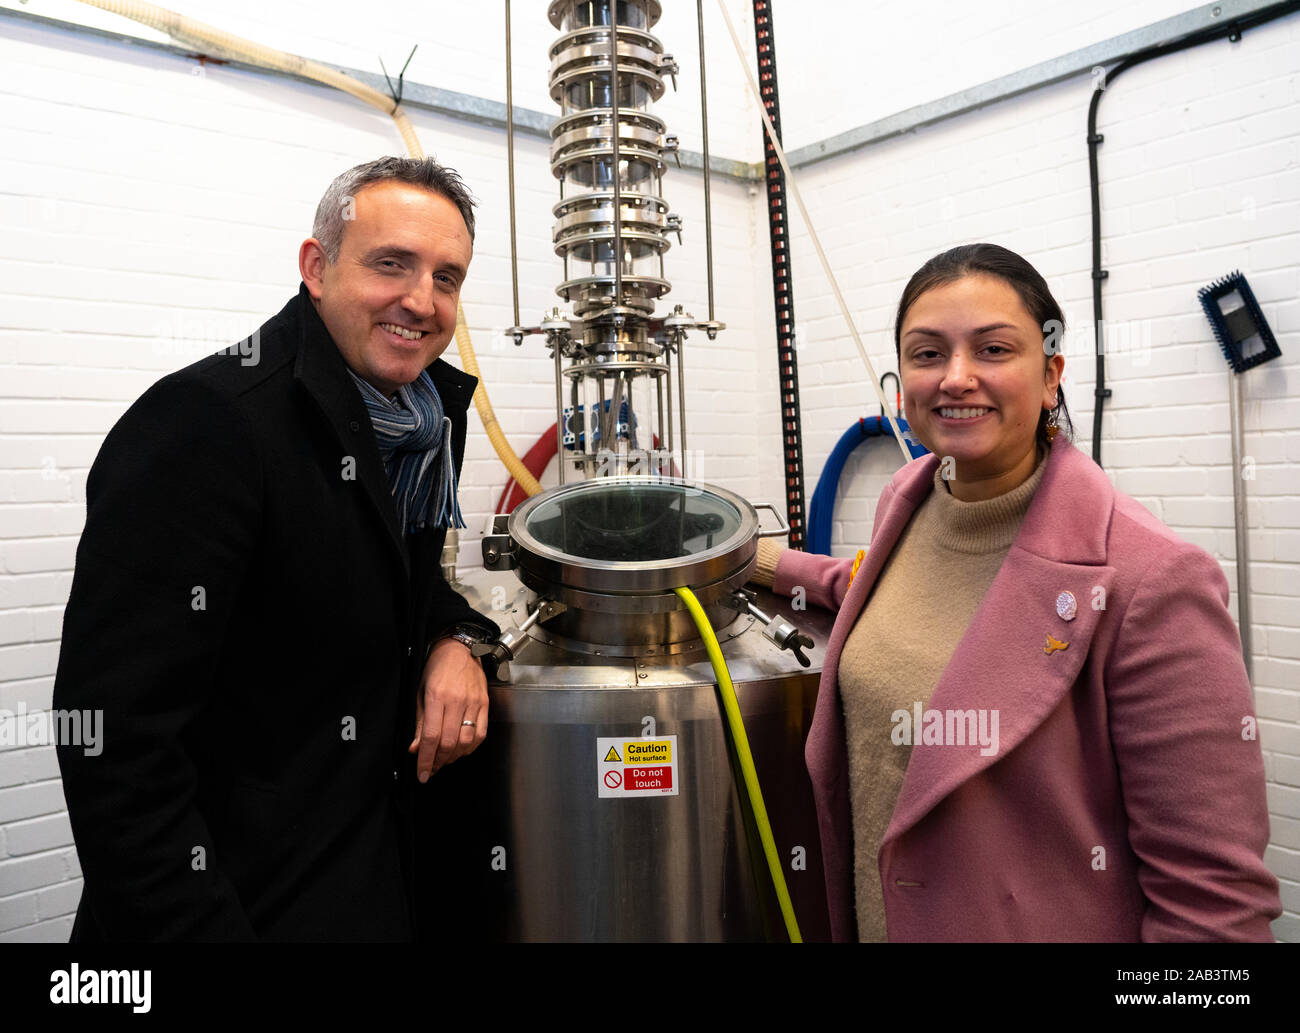 Leith, Scotland, UK. 25th November 2019. Scottish Liberal Democrat campaign chair Alex Cole-Hamilton and Rebecca Bell Liberal parliamentary candidate for Dunfermline and West Fife visited Port of Leith Distillery and outlined the party’s plans to target new ground such as Edinburgh North and Leith, as well as recapturing the party’s traditional Scottish heartlands in the snap general election. Iain Masterton/Alamy Live News. Stock Photo